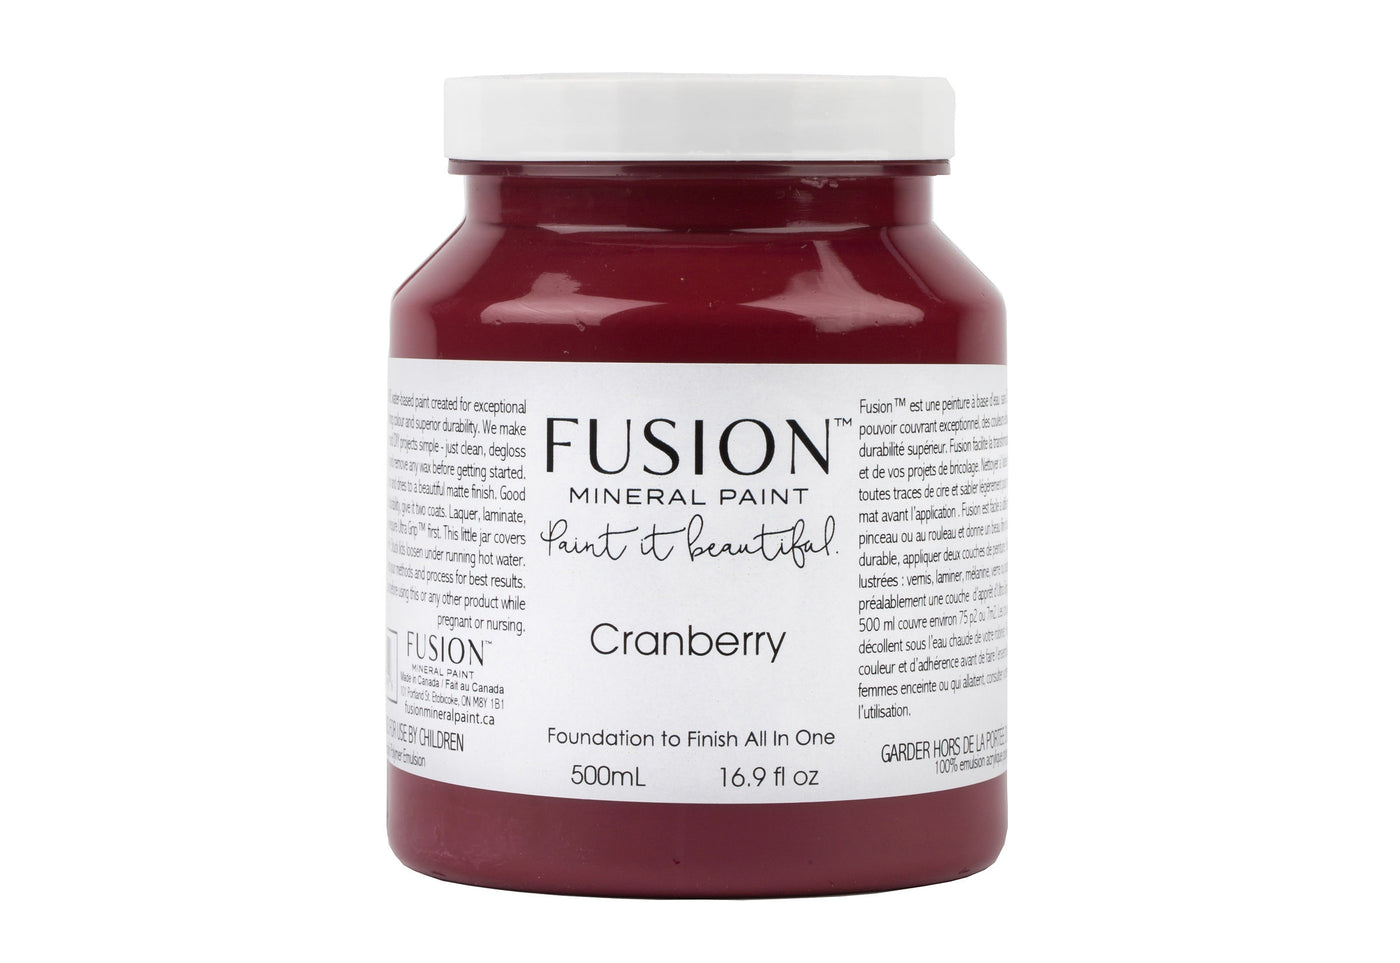 Burgundy red 500ml pint from Fusion Mineral Paint